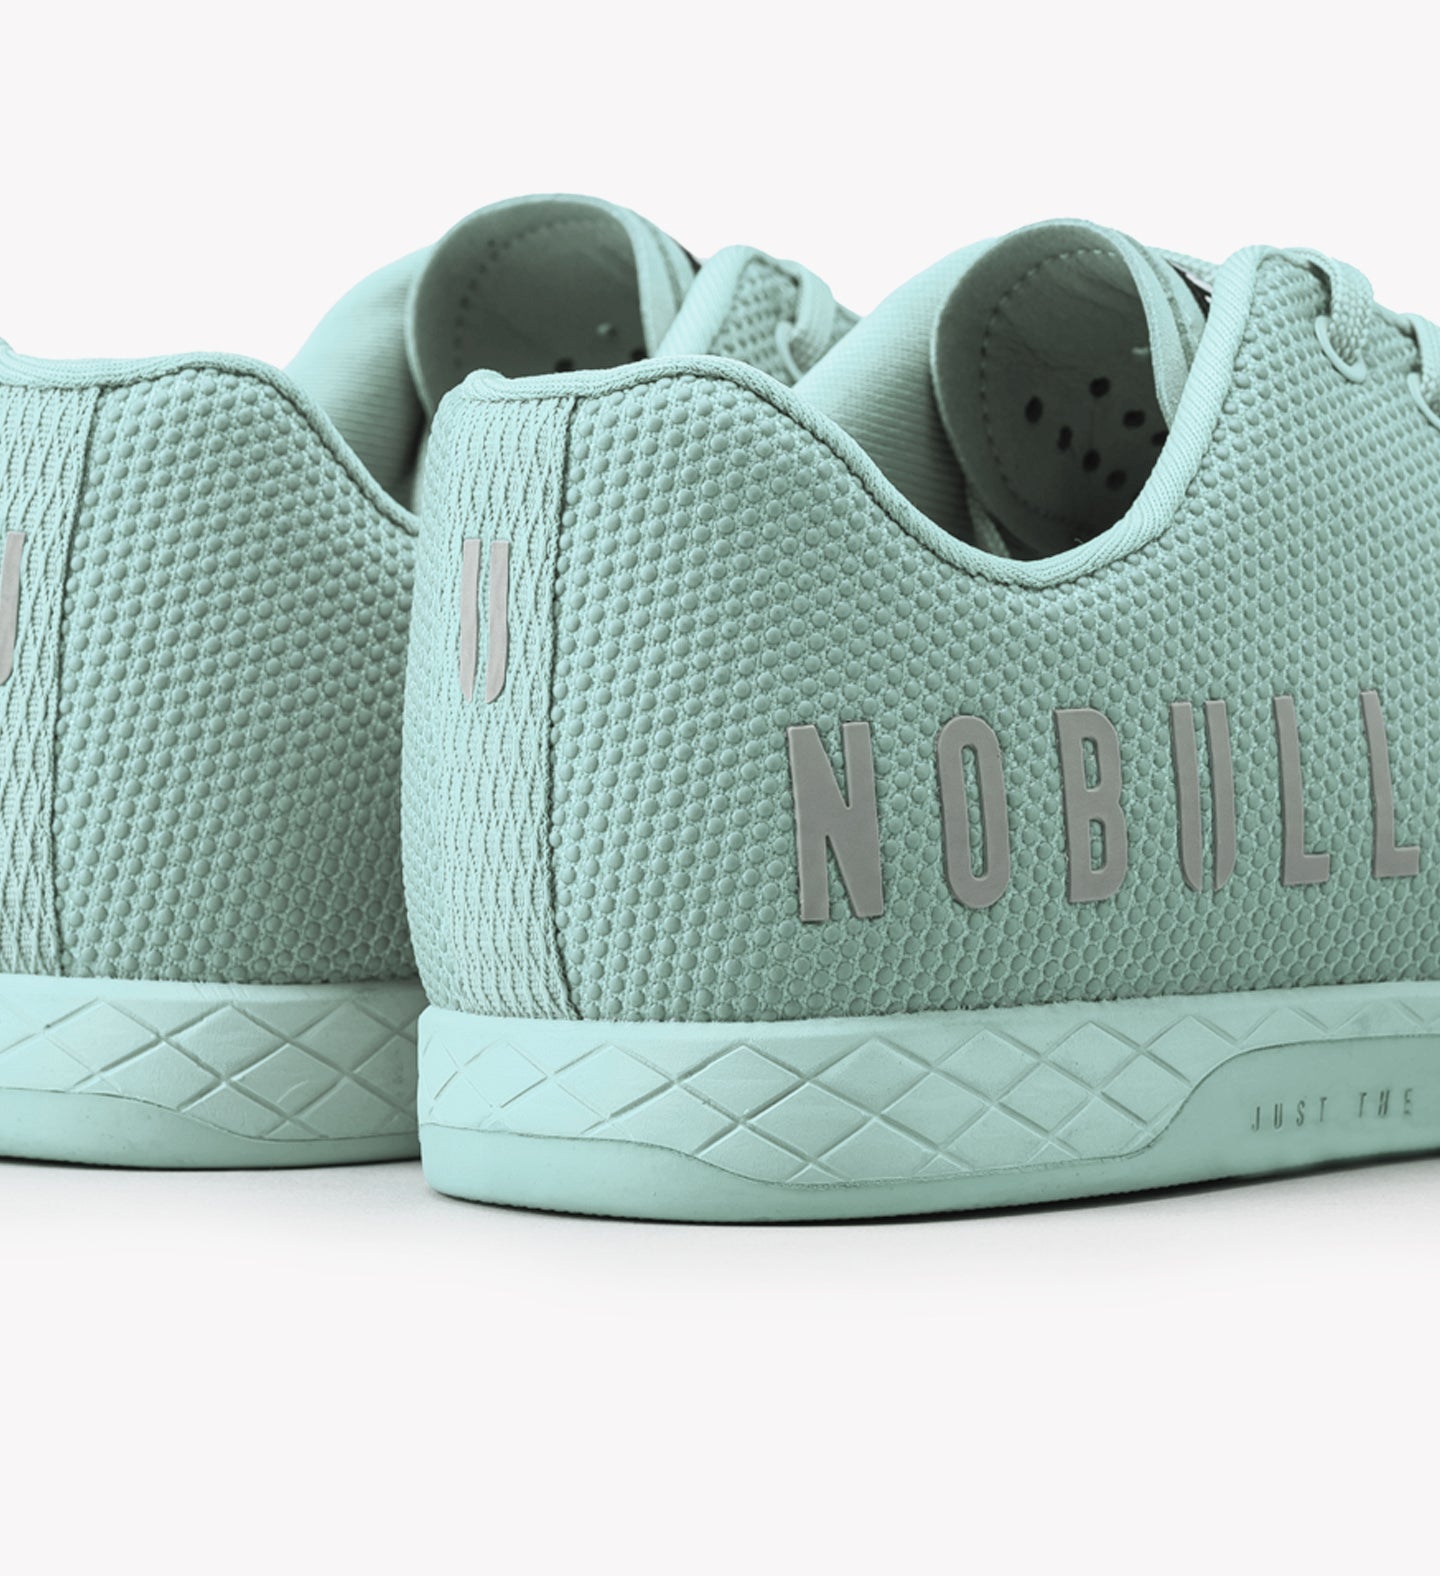 NOBULL - High-Top Blue Glass Trainer, NOW AVAILABLE!